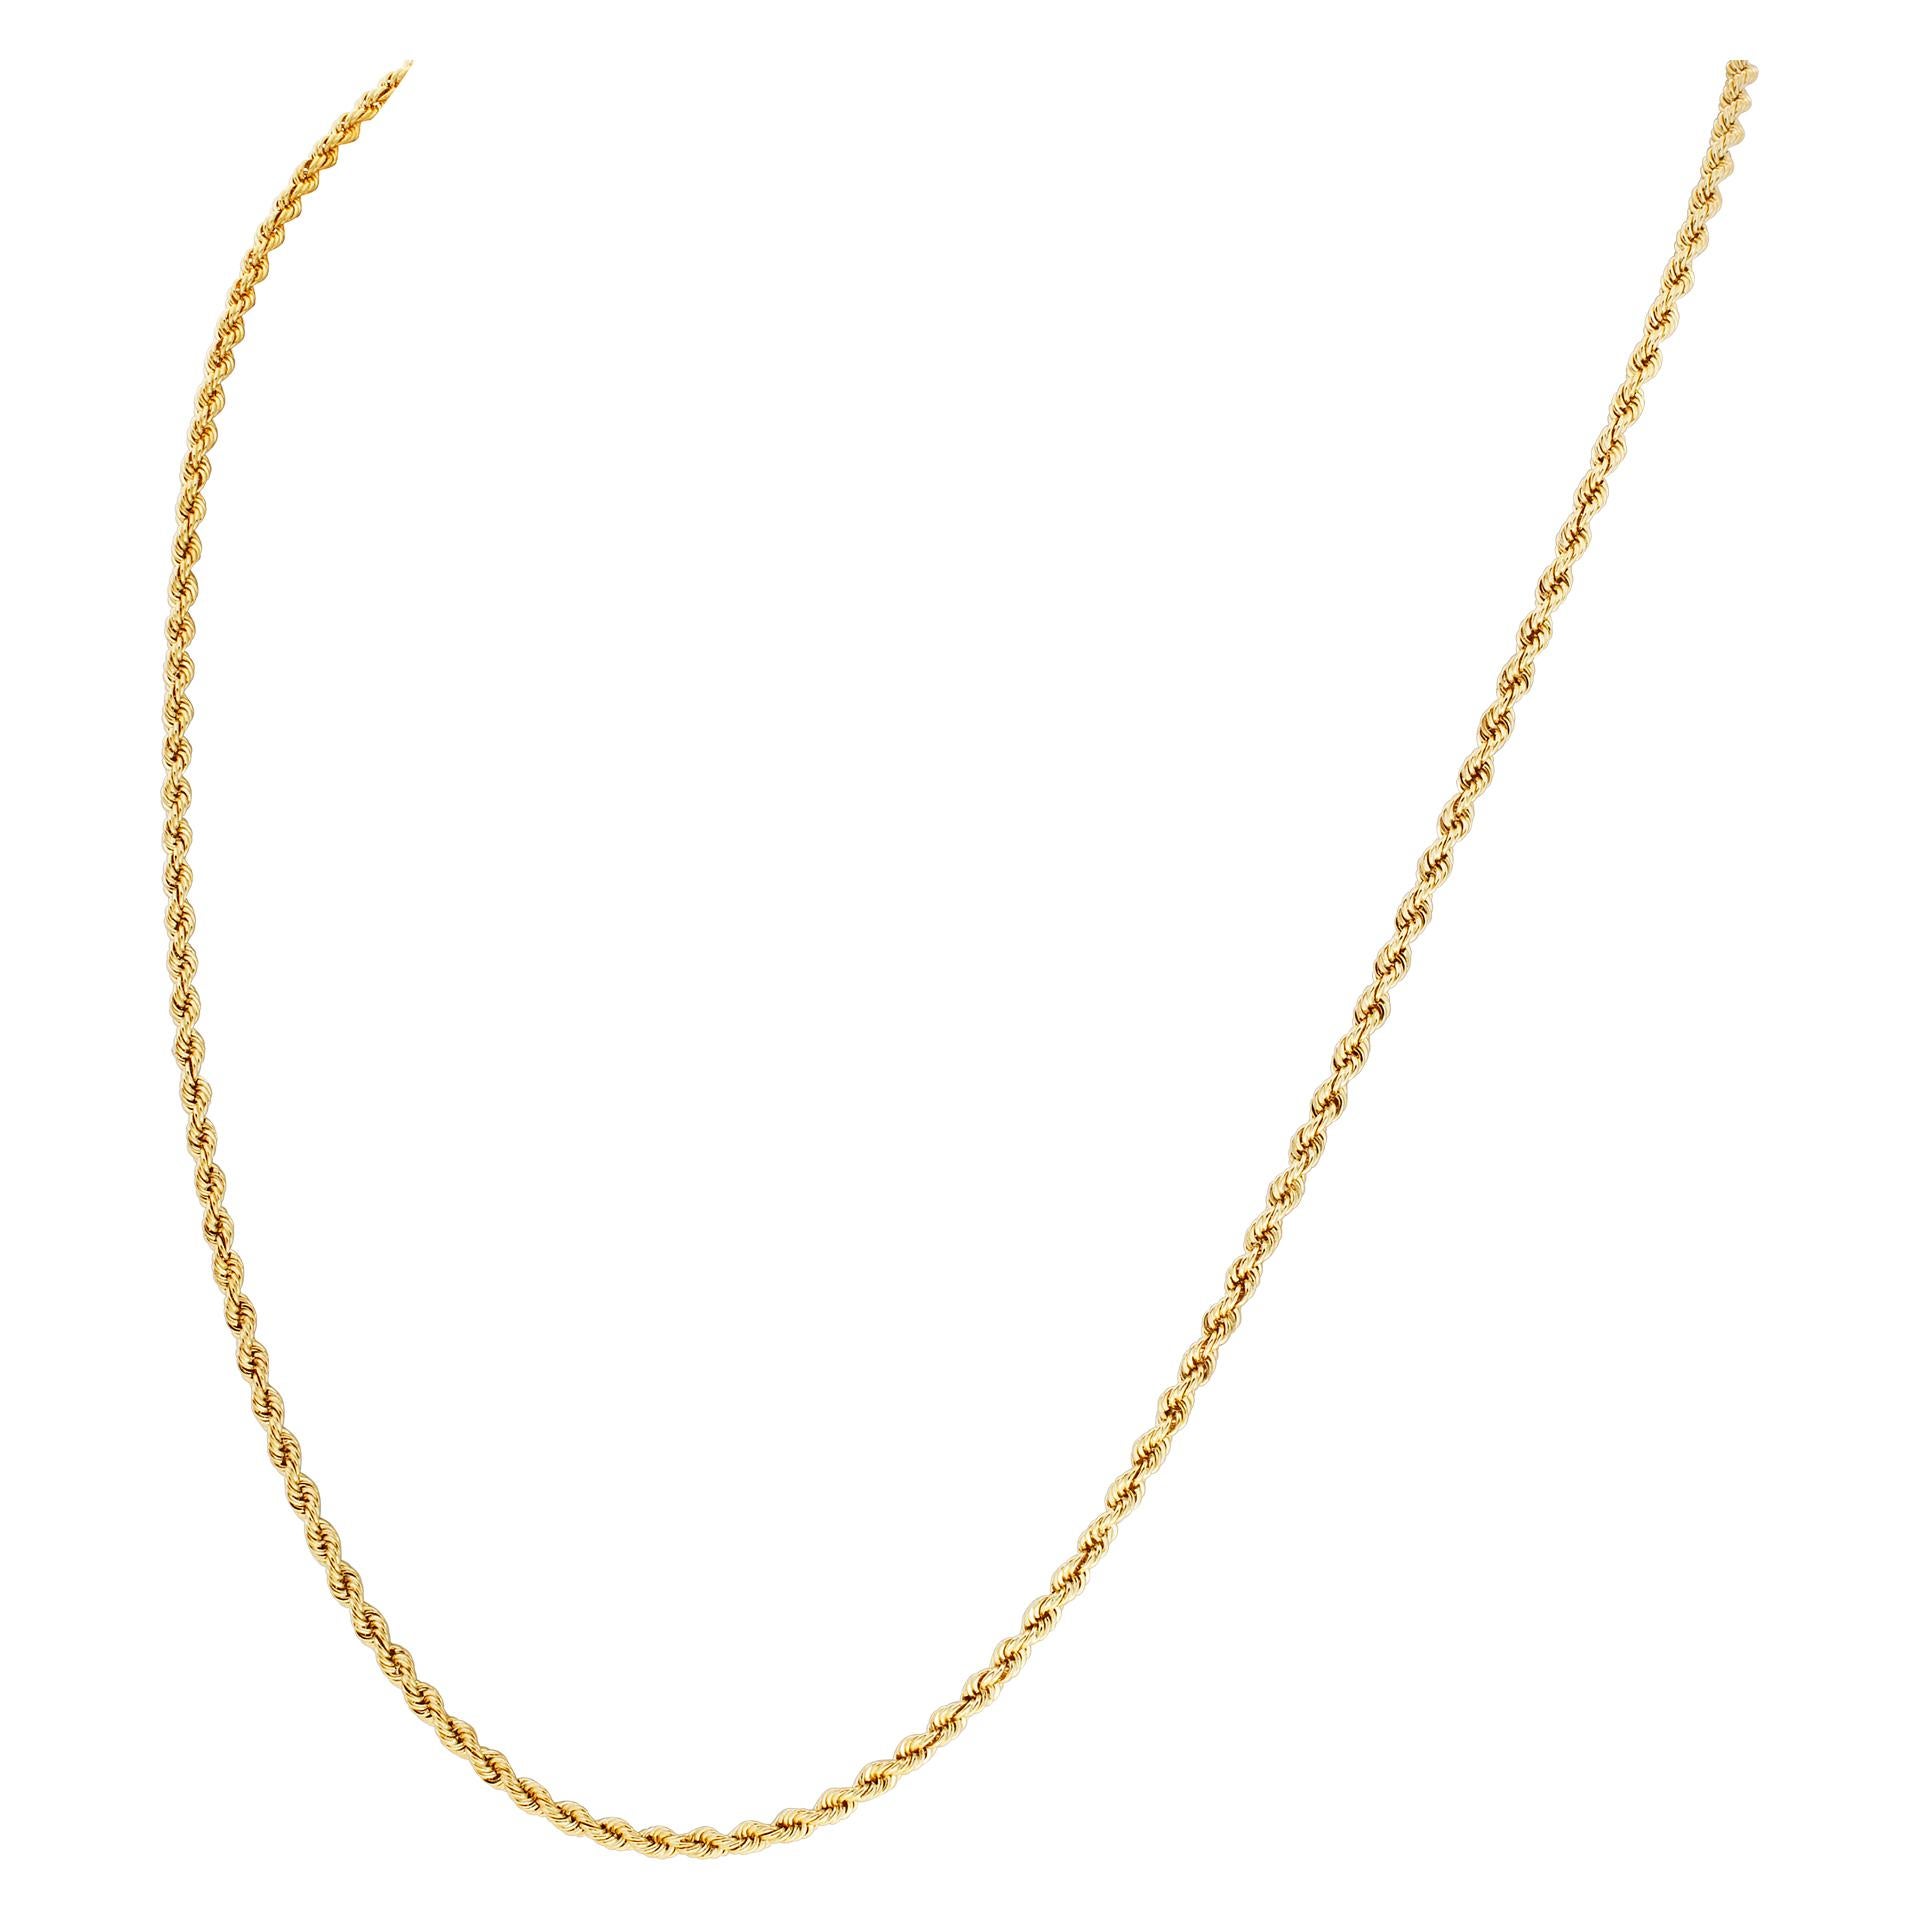 Rope Chain in 14k Yellow Gold In Excellent Condition For Sale In Surfside, FL